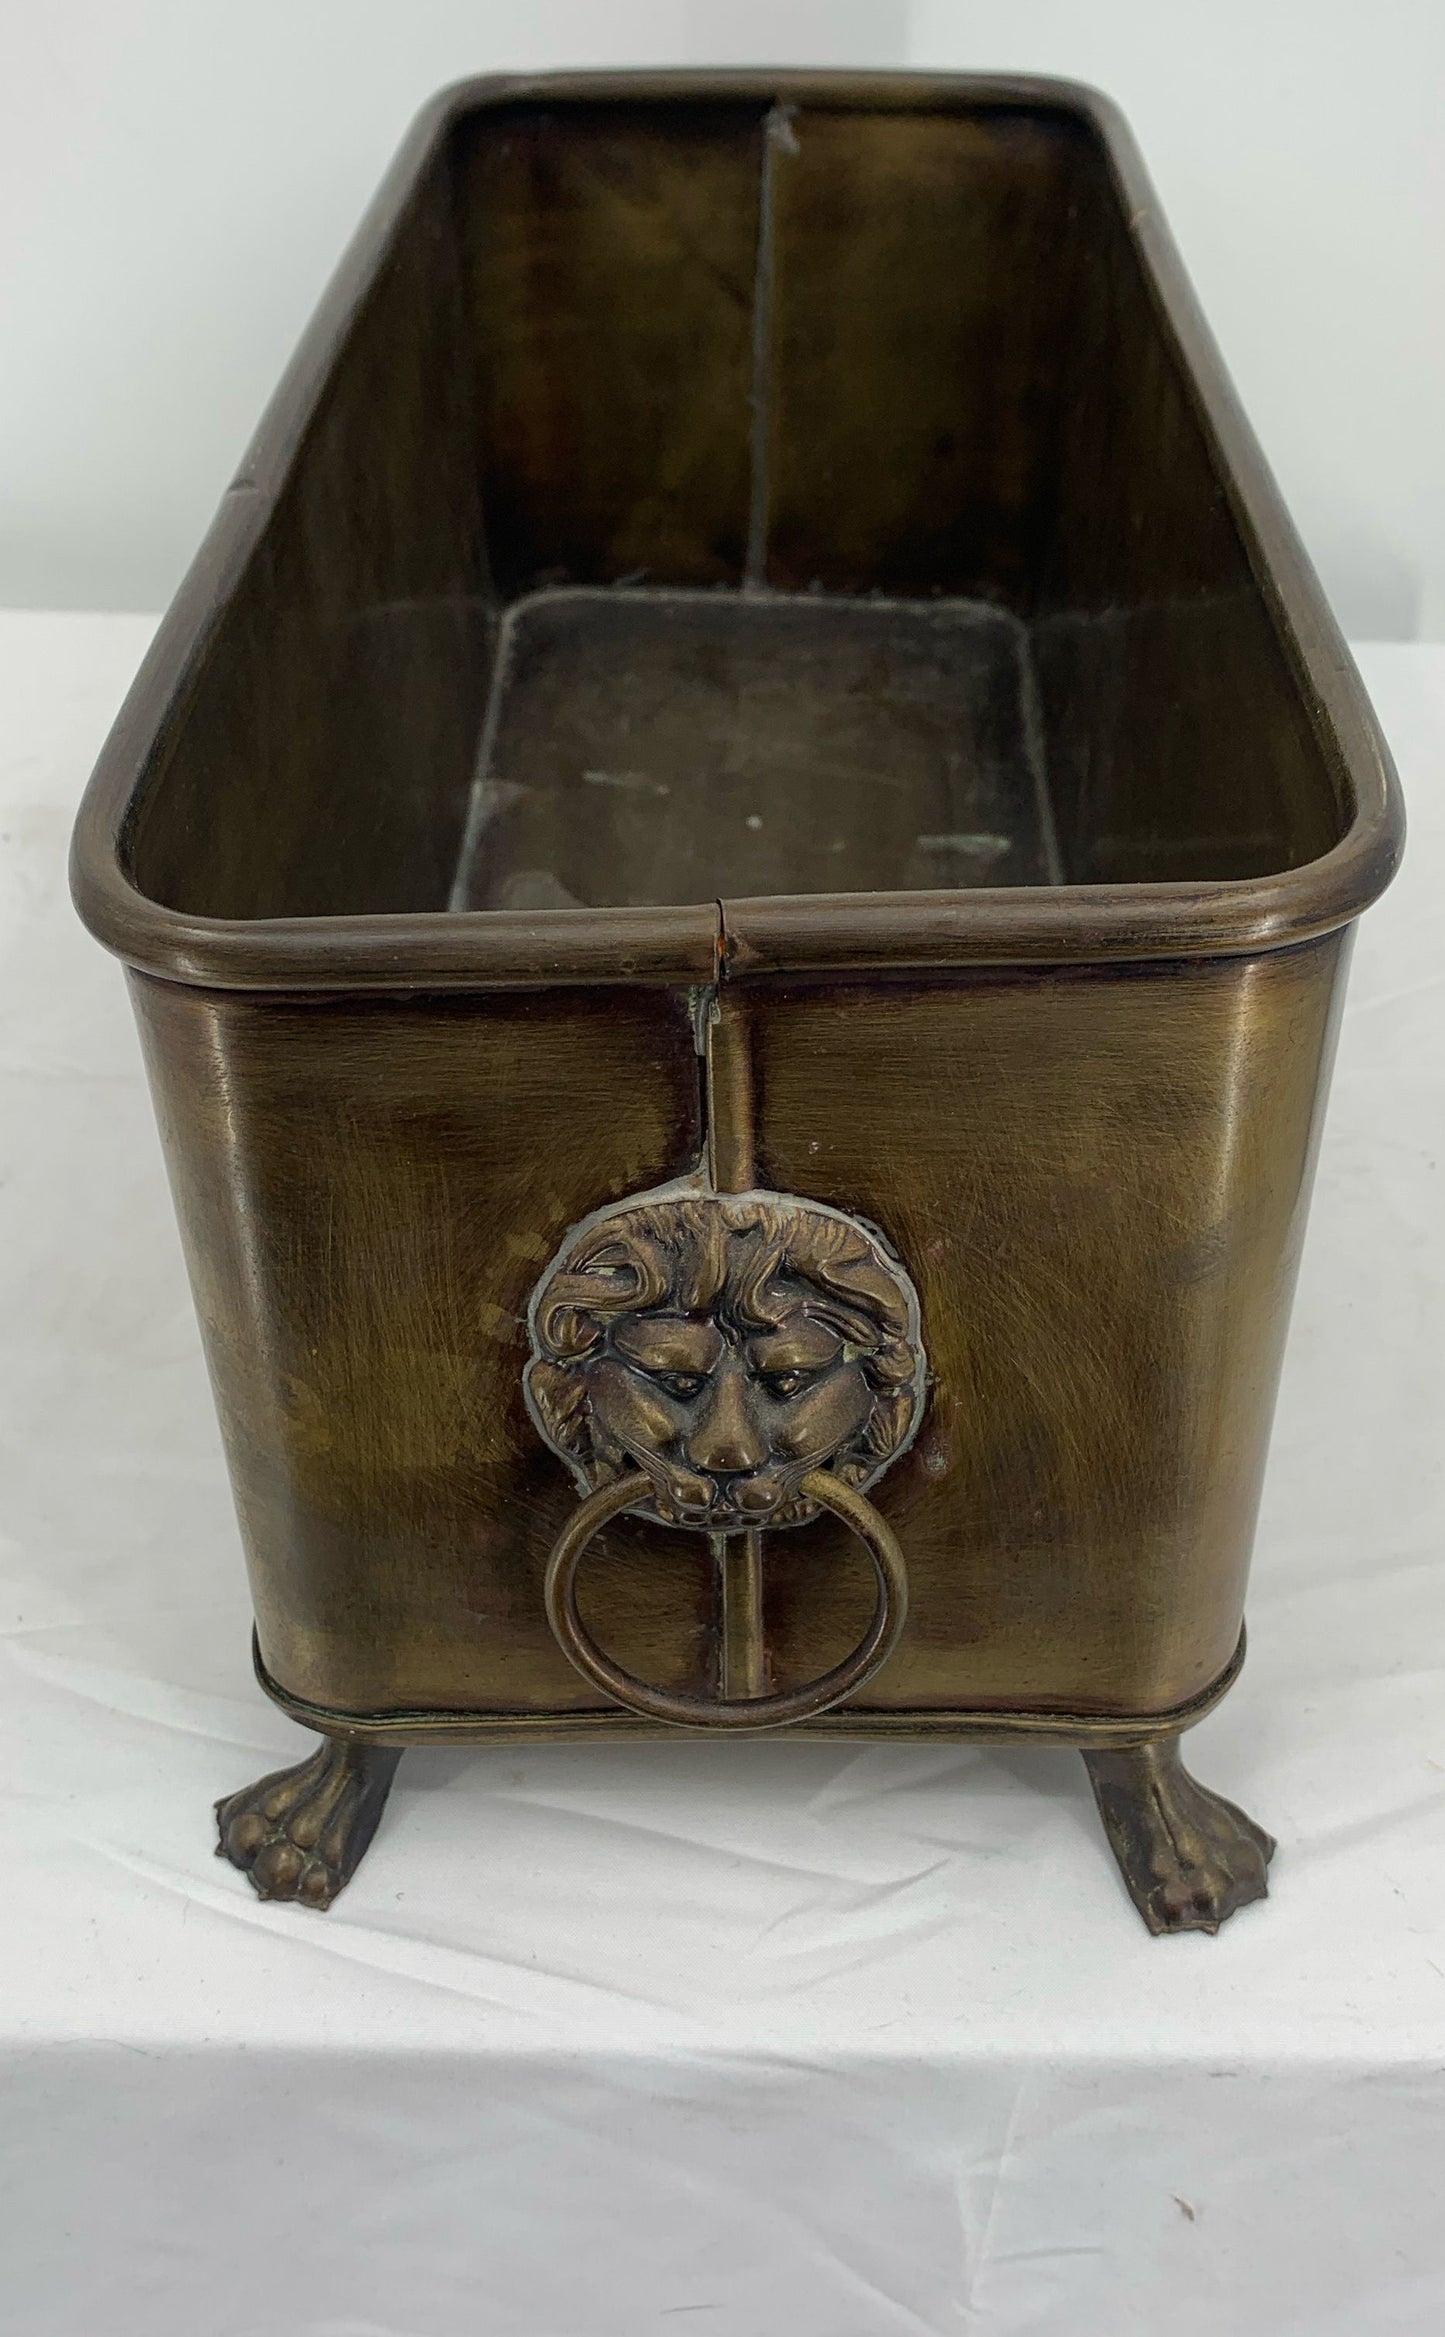 Antique England Jardiniere Copper/Brass Planter-Lion's Head Handles With Rings